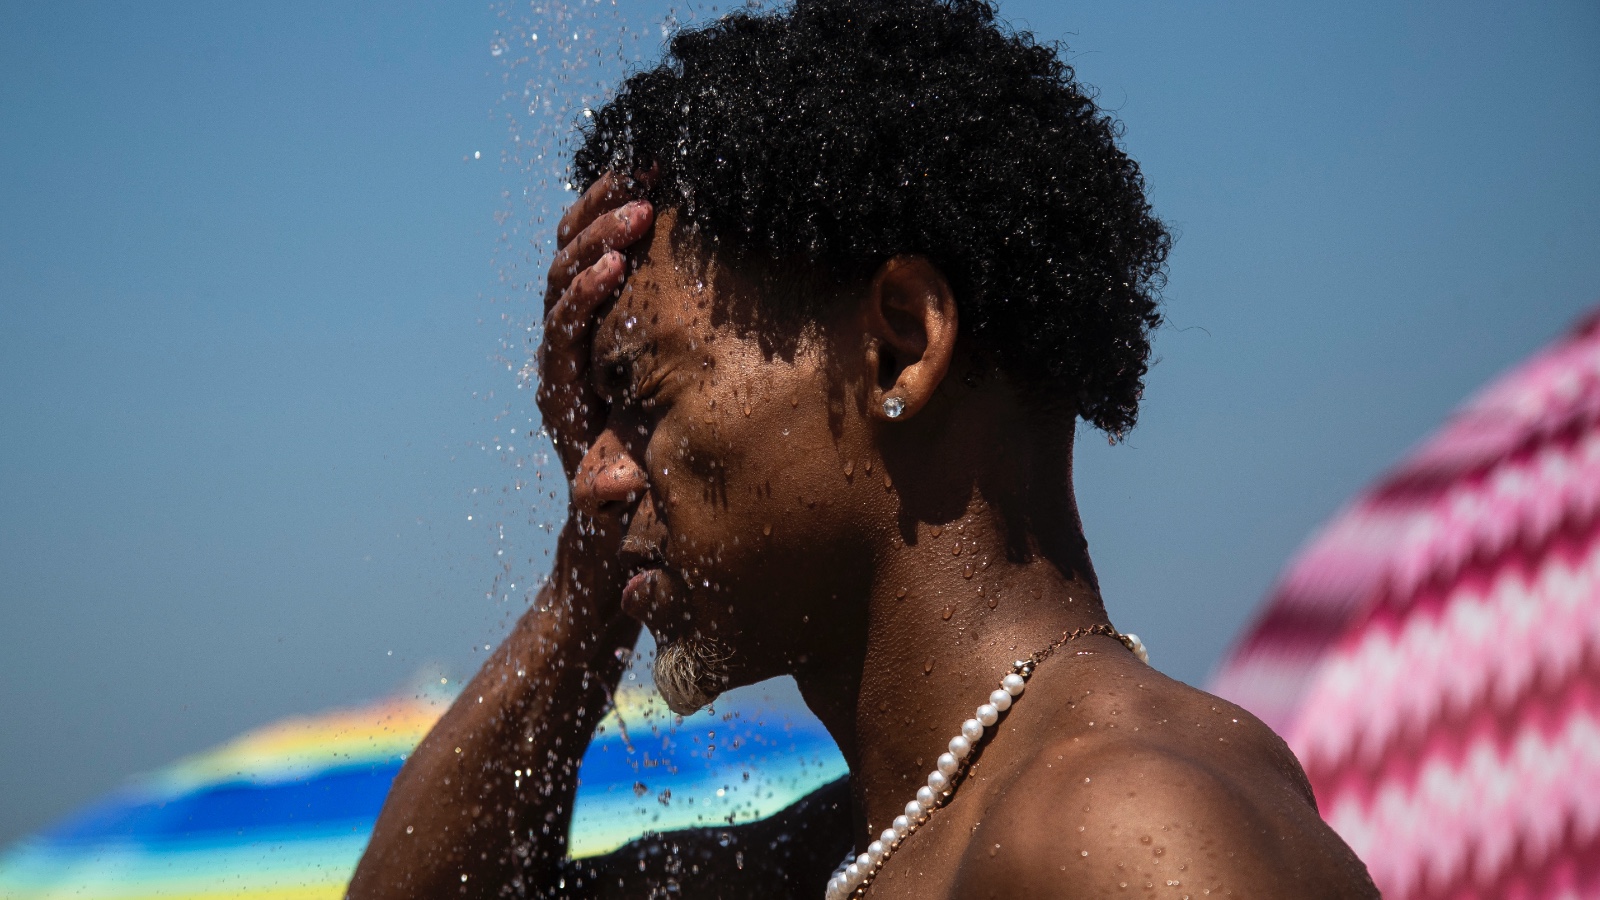 A person in Brazil splashes water on their face to cool off during a heat wave.